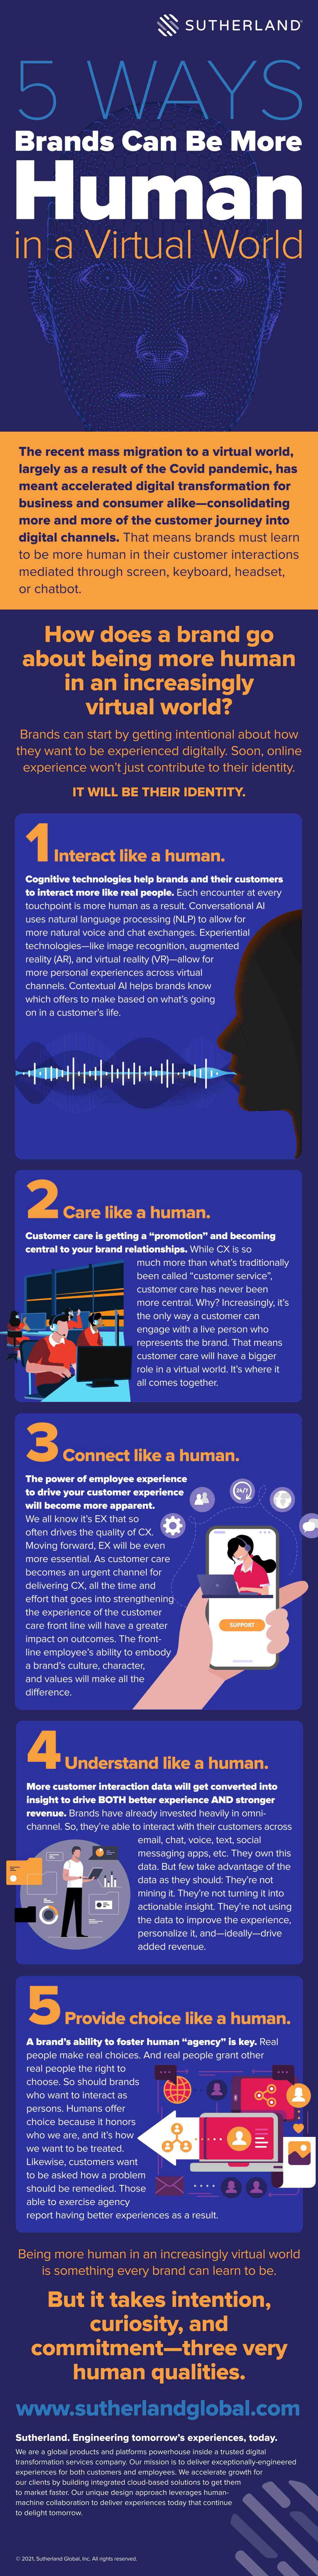 Infographic Being Human In a Virtual World